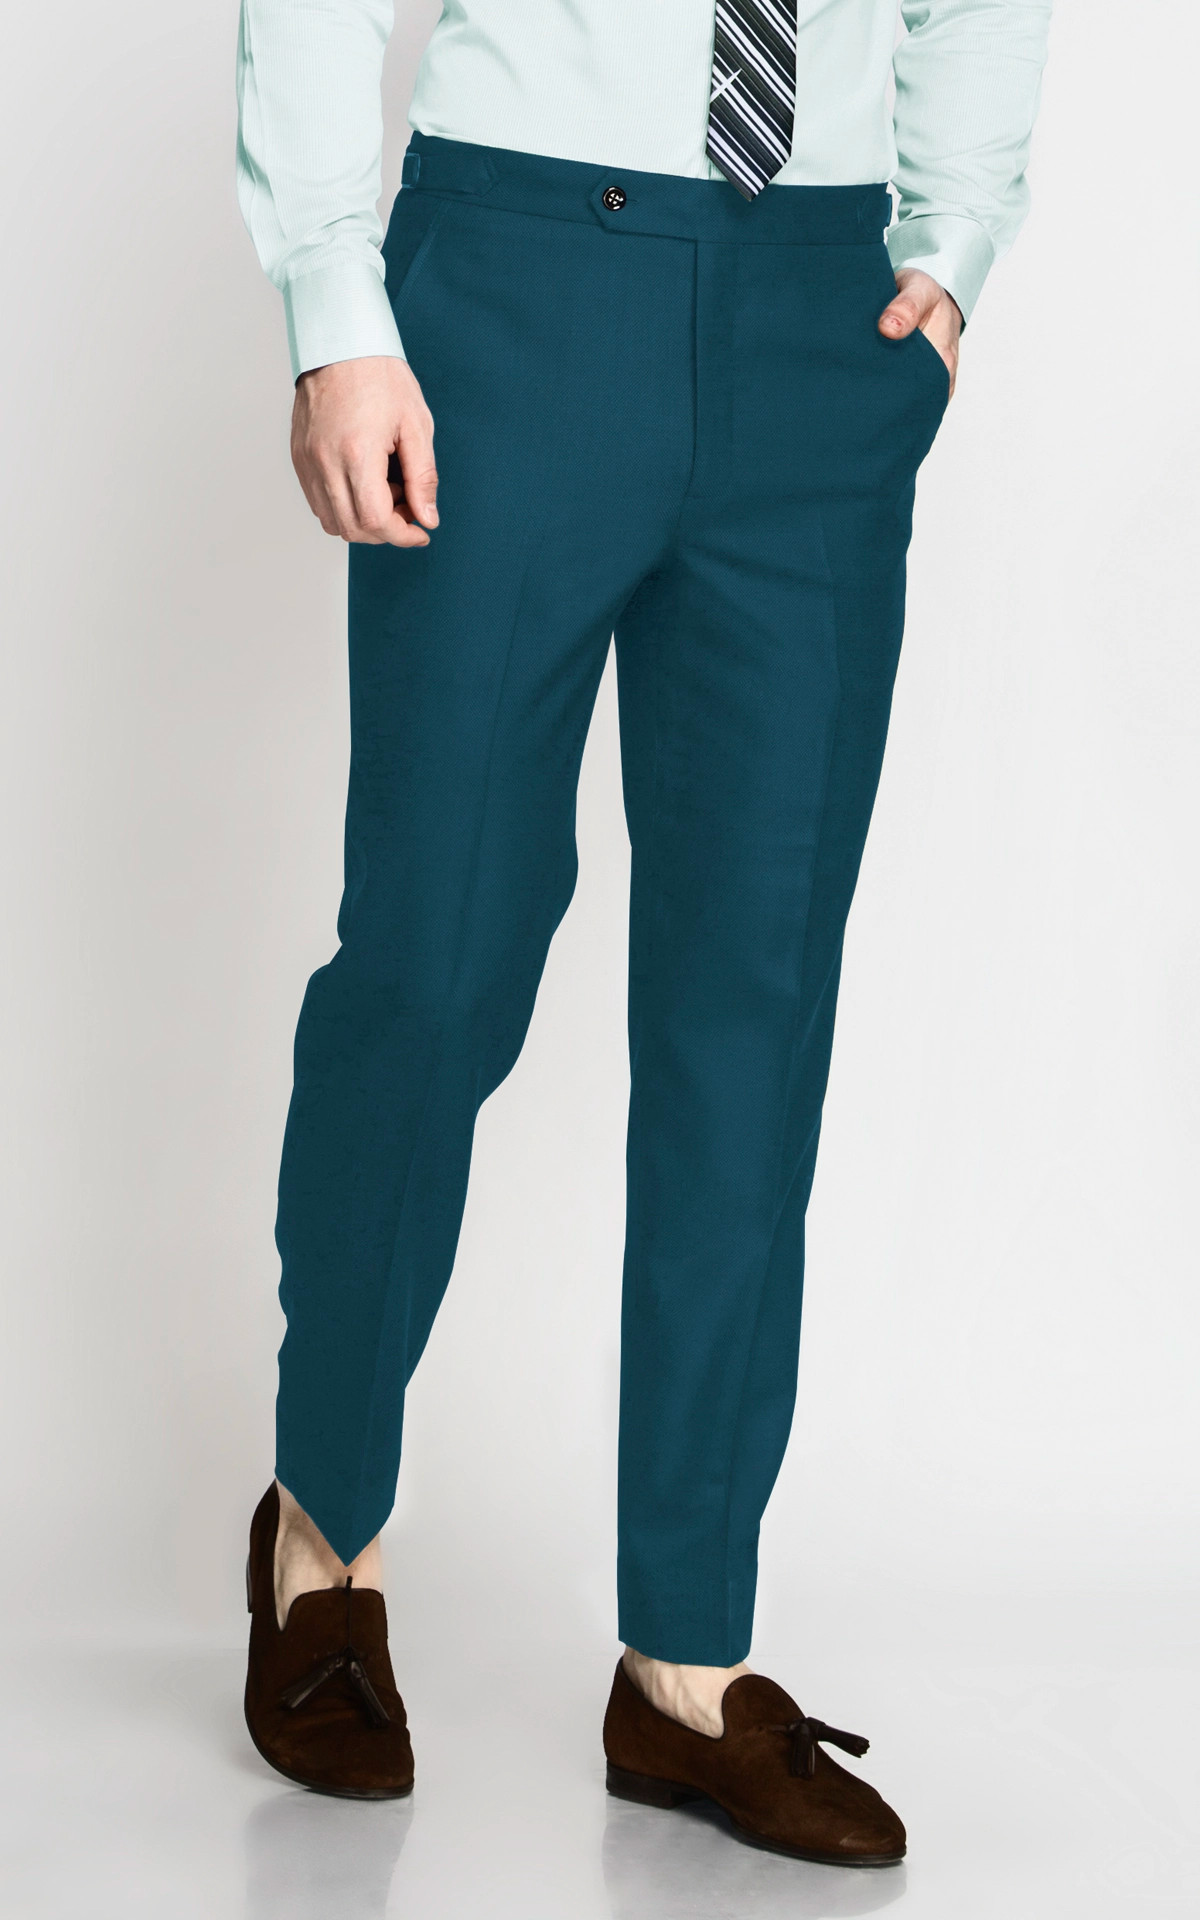 Solid Mid-Rise Stretchable Men's Formal Trouser - Pista